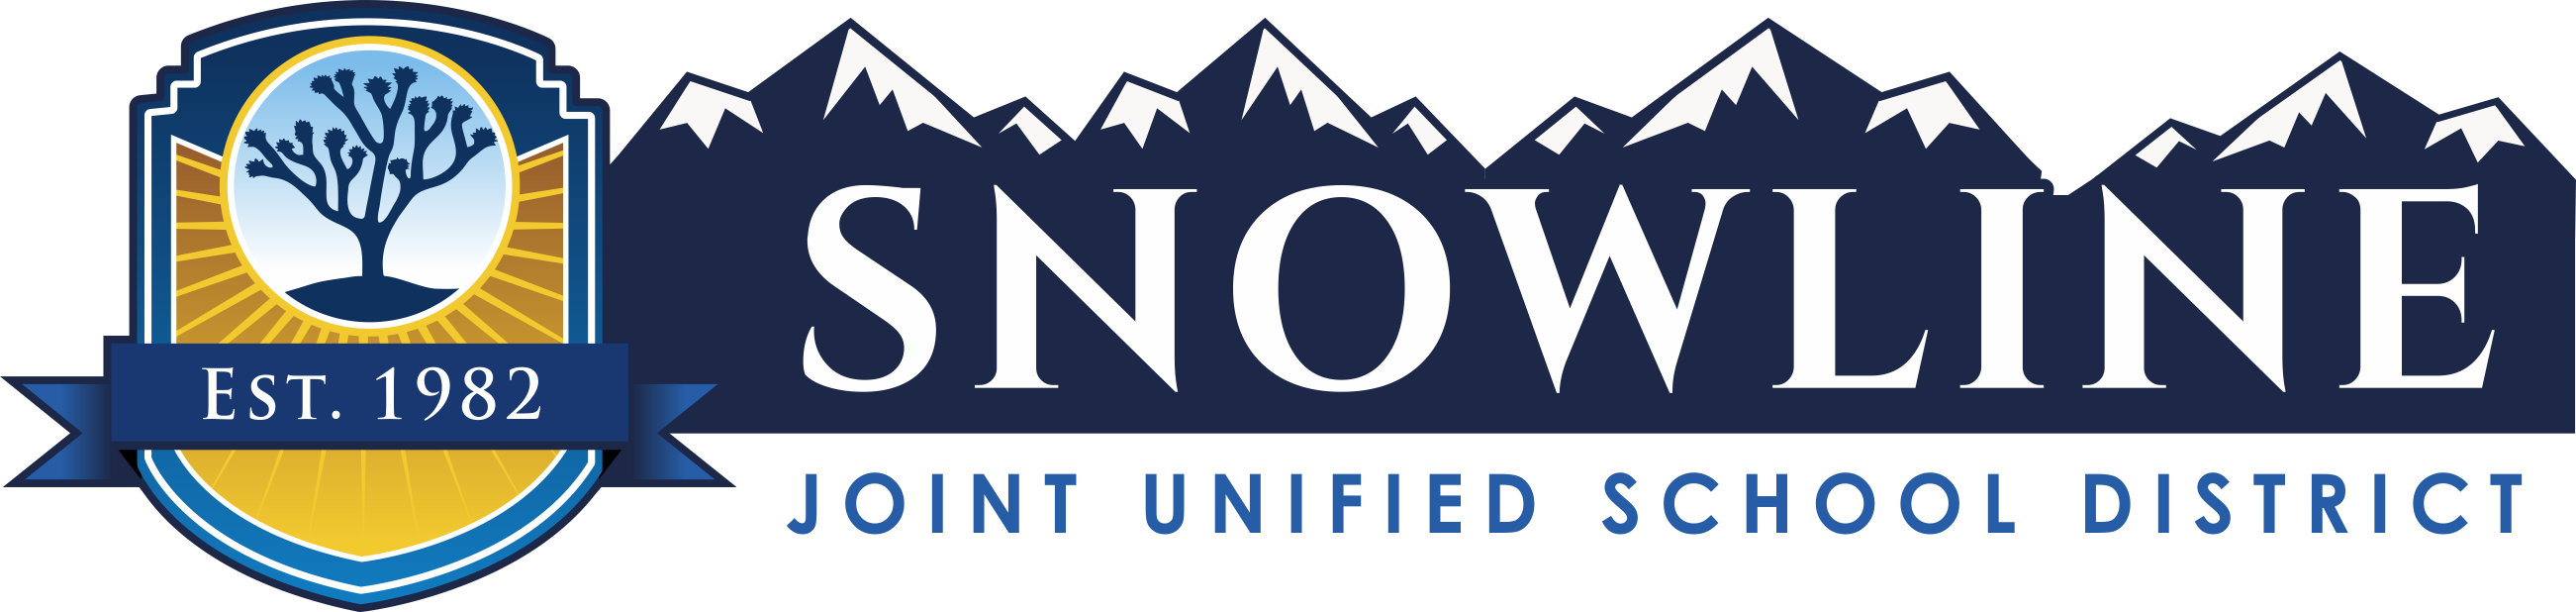 Staff Resources - Main Nav - Snowline Joint Unified School District